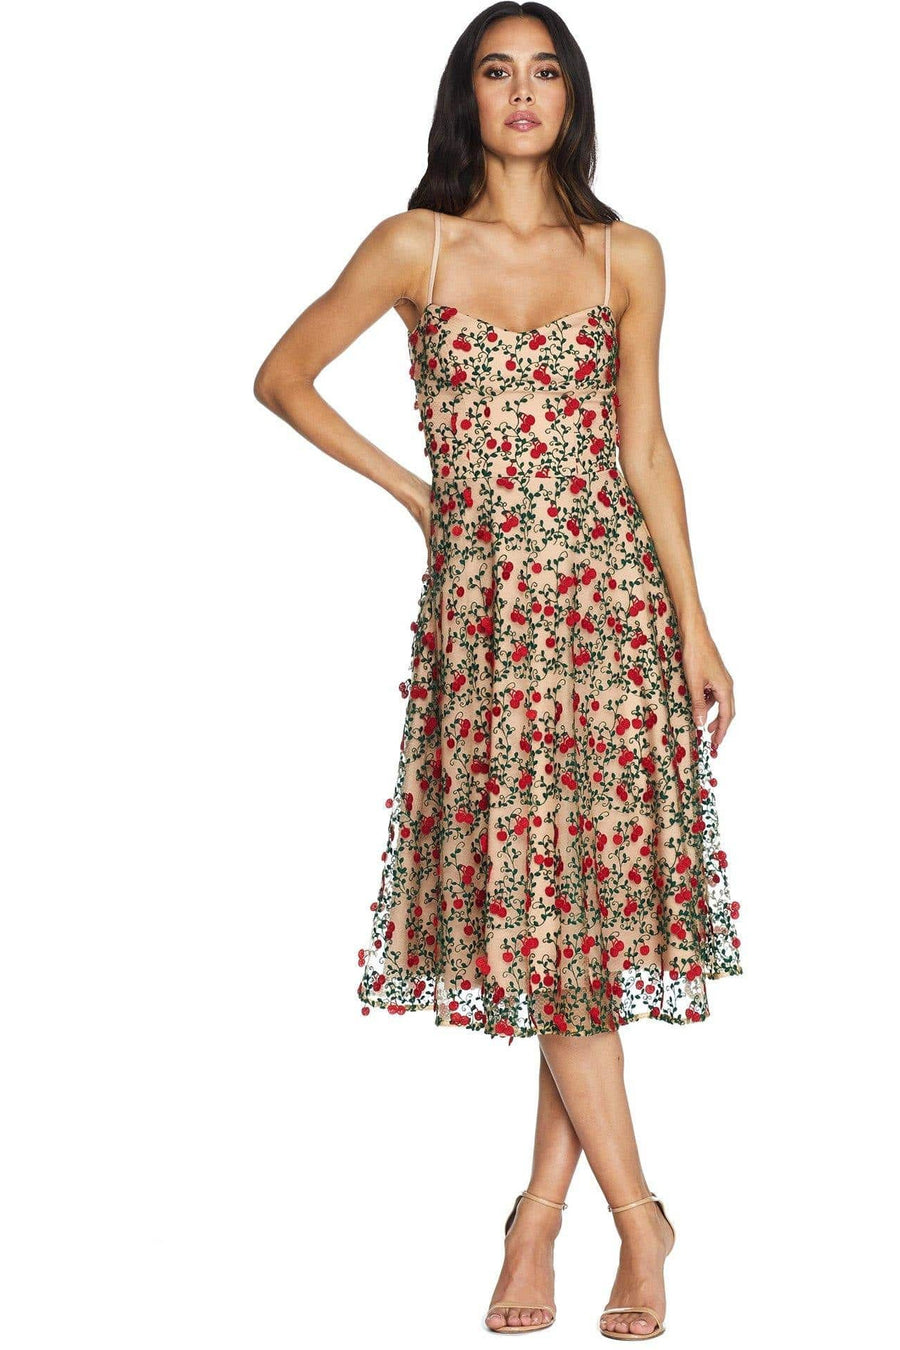 Janice Romantic Embroidered Dress - Dress the Population